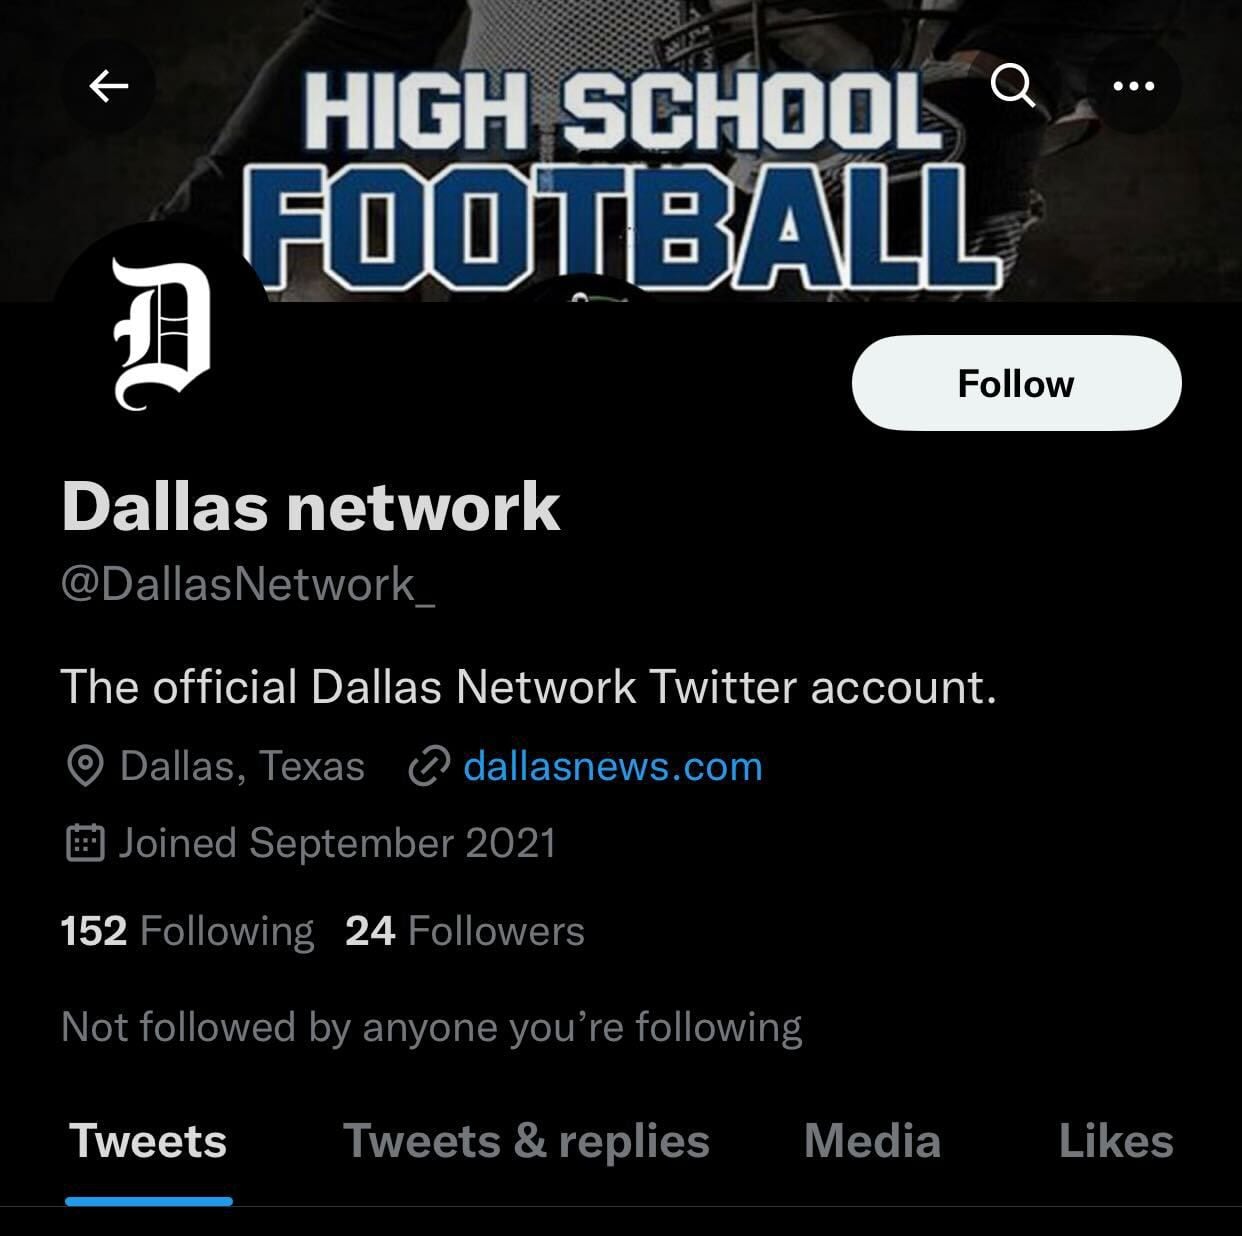 Screenshot "Dallas network"spam twitter account that posts scam posts about high school...